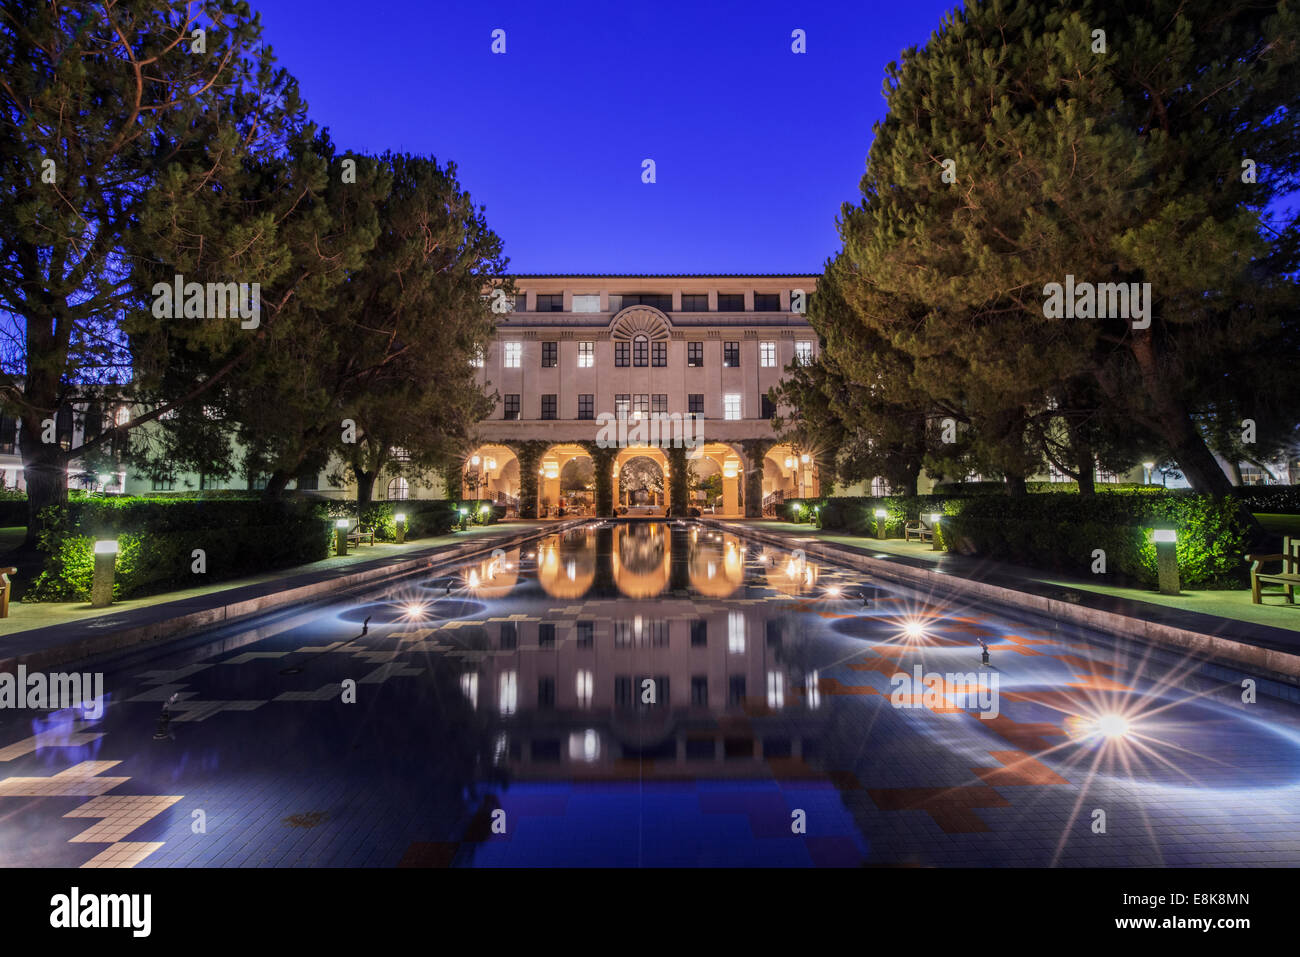 États-unis, Californie, Pasadena, California Institute of Technology, Beckman Institute Reflecting Pool Banque D'Images